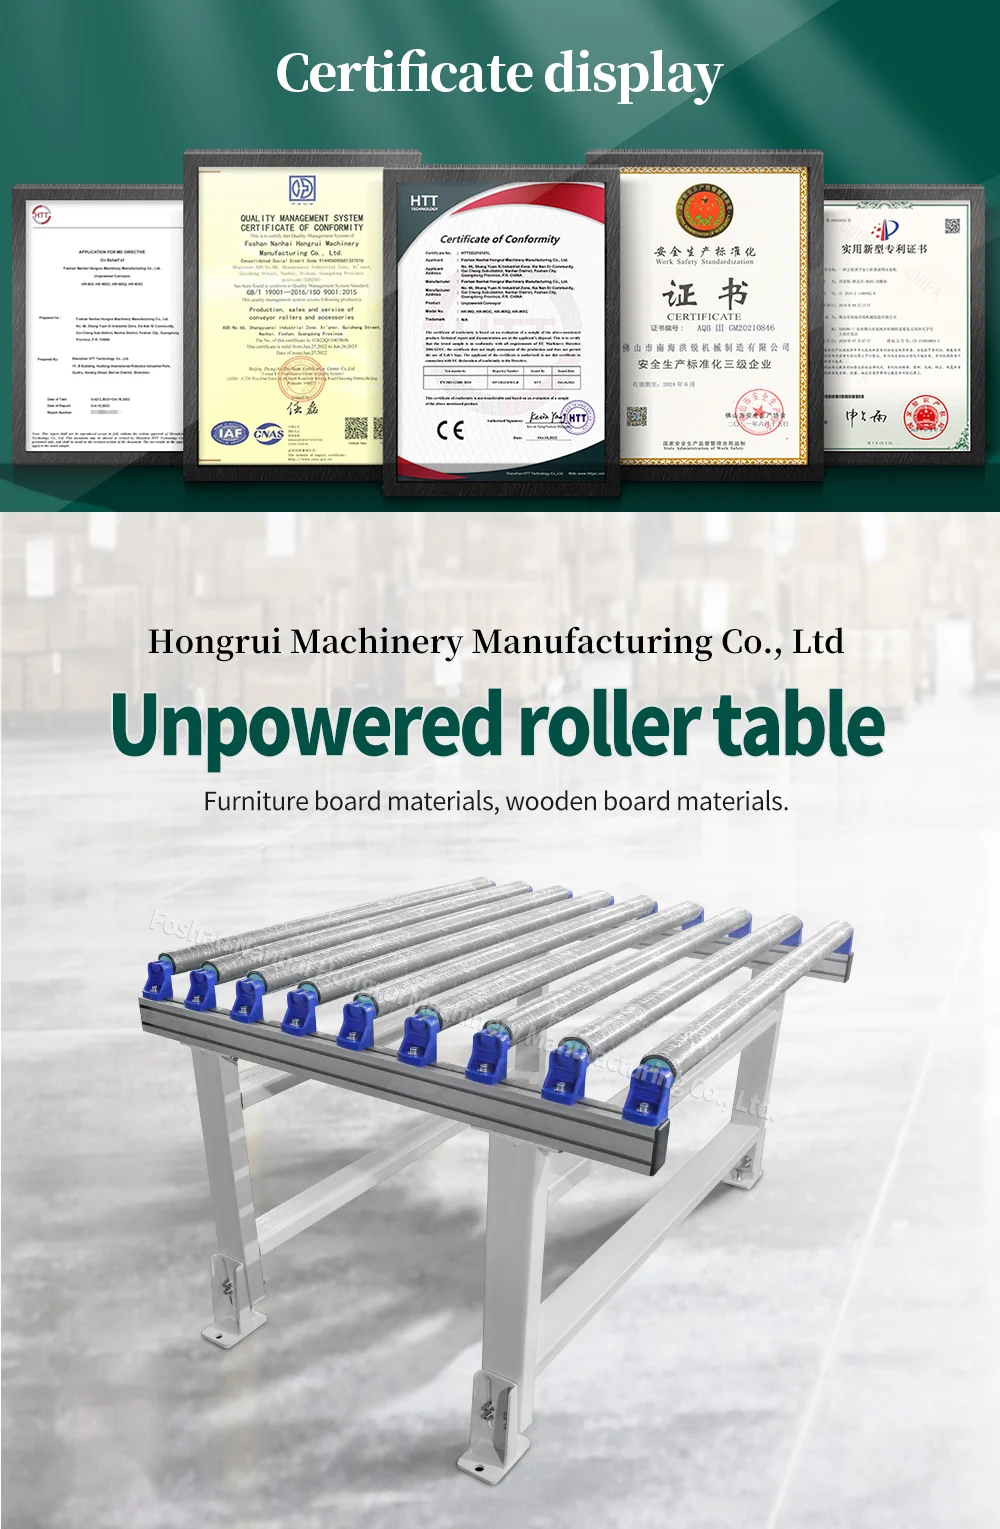 Seamless Edge Sealing: Small Short Roller Tables with Smooth Rolling Mechanism details